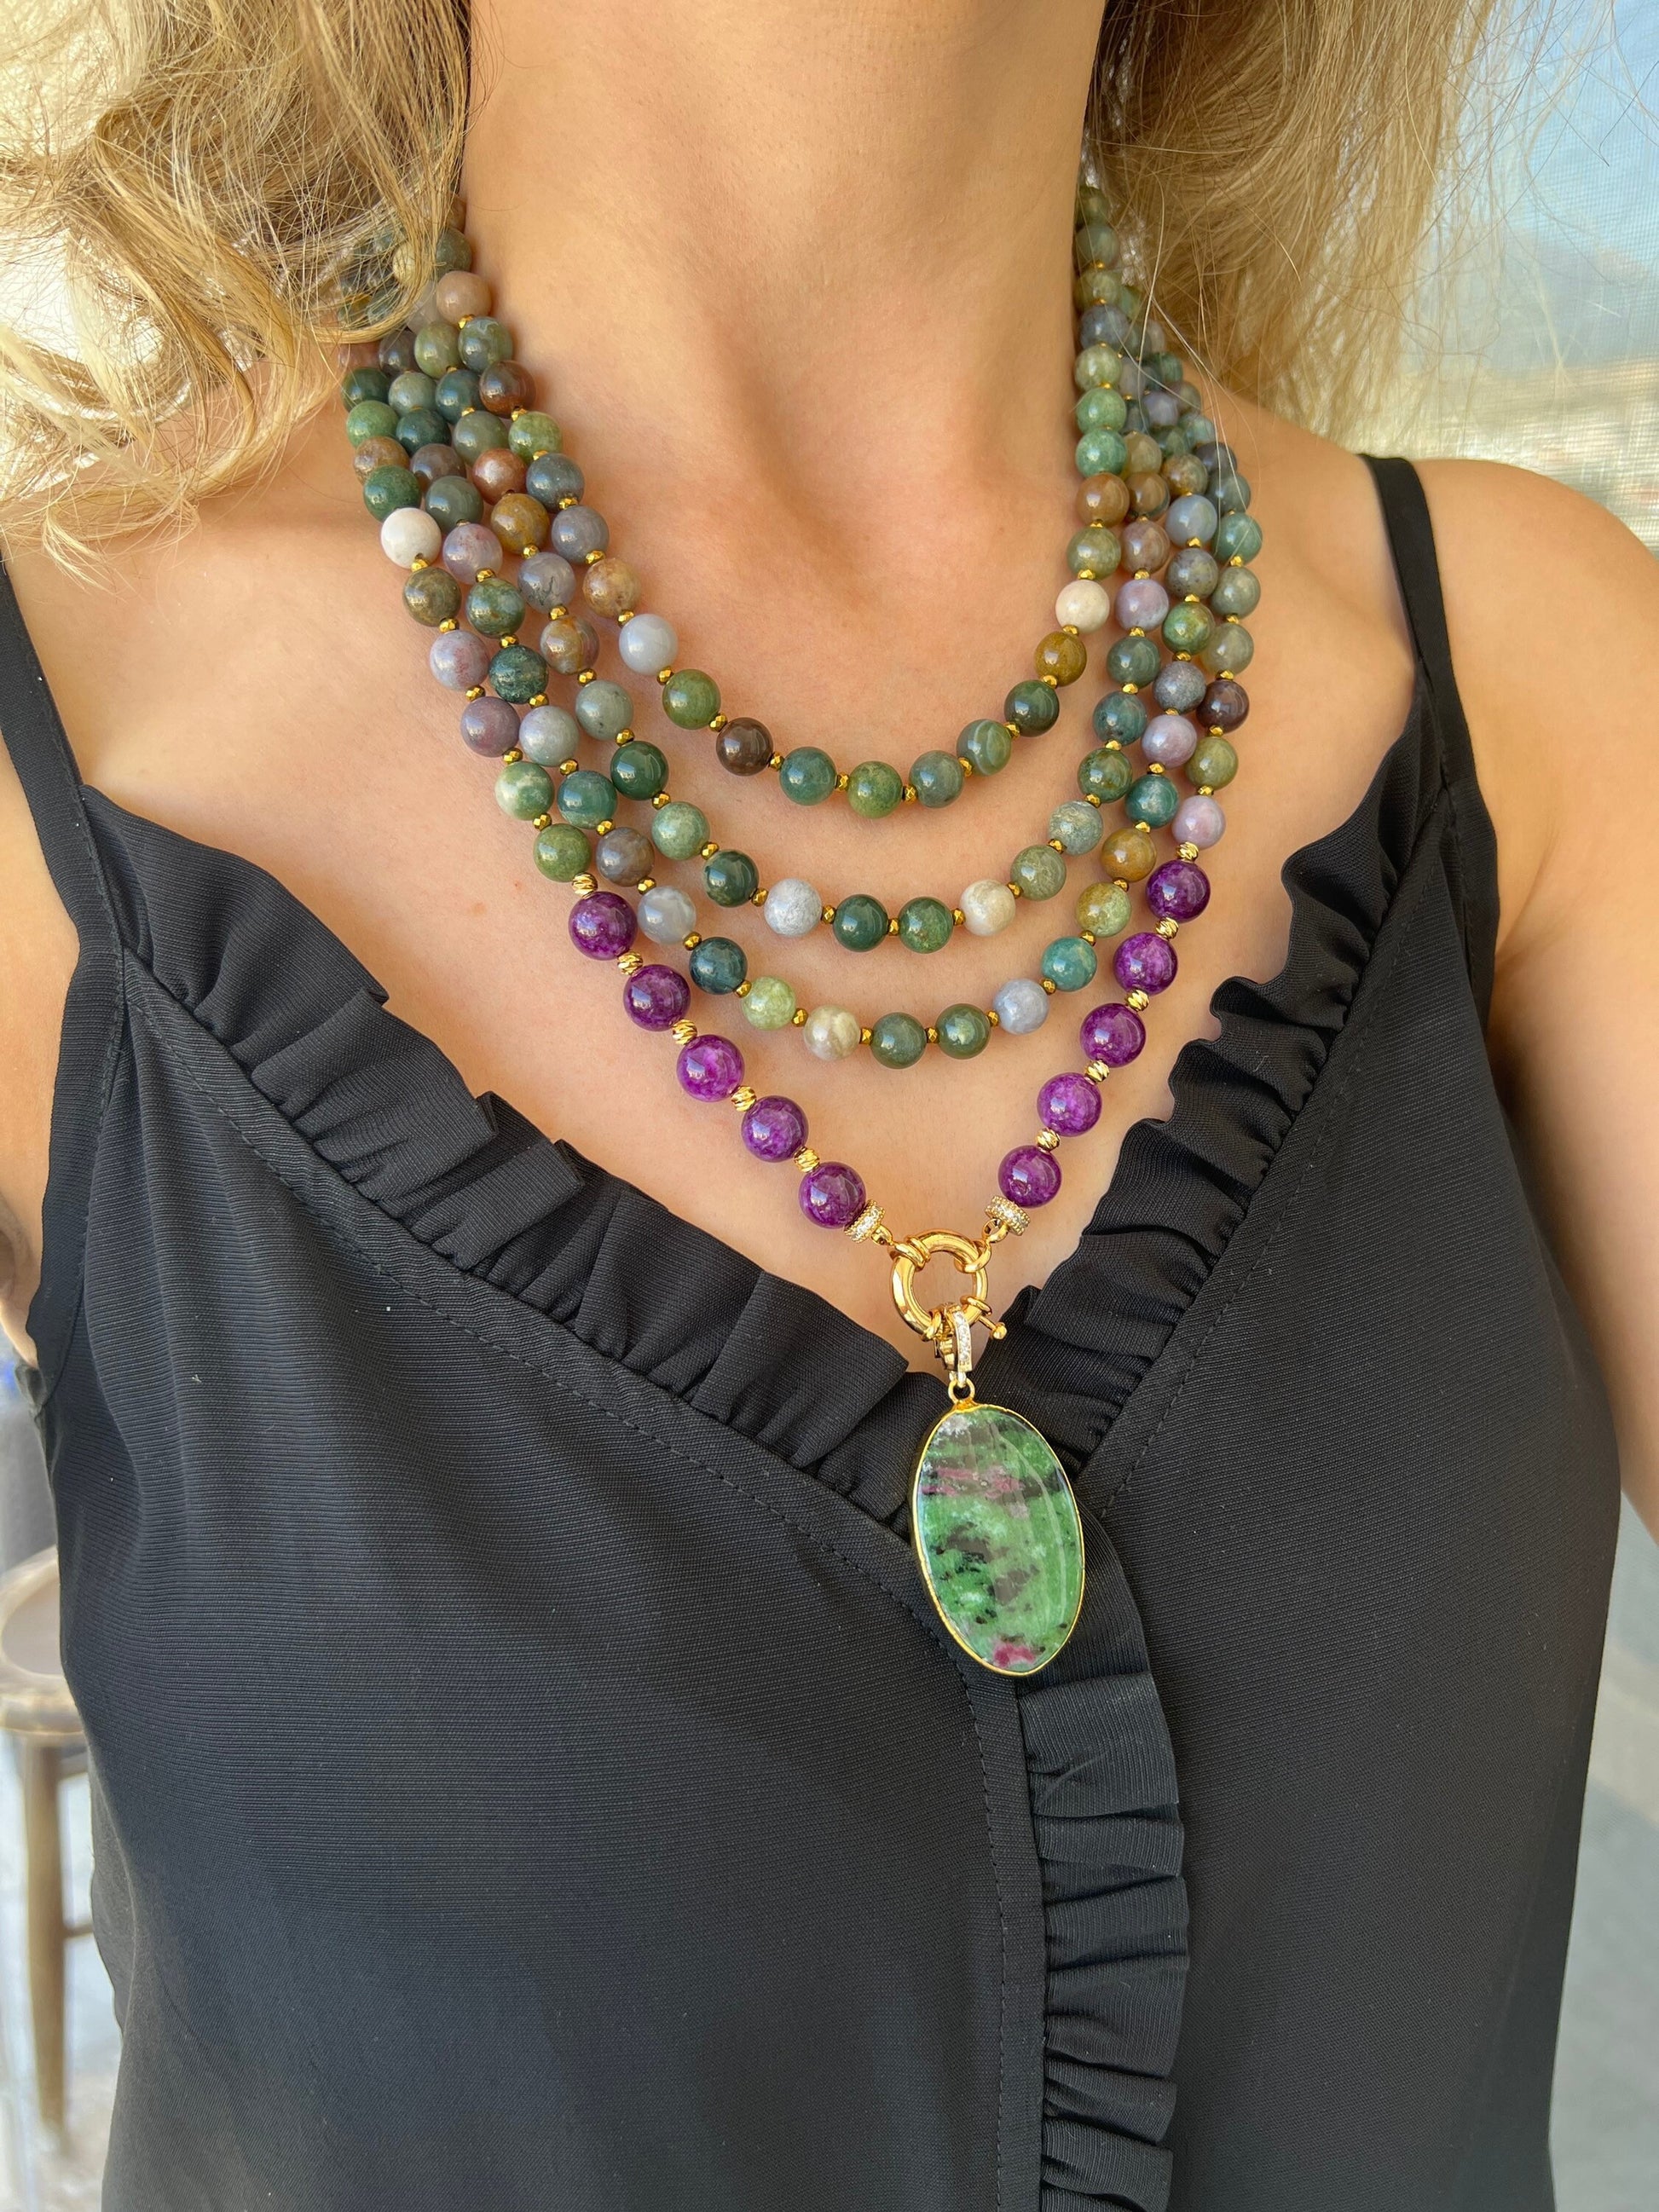 Agate Necklace, Green and Purple Gemstone Necklace, Statement Necklace, Handmade Wife Birthday Gift, Pendant Necklace